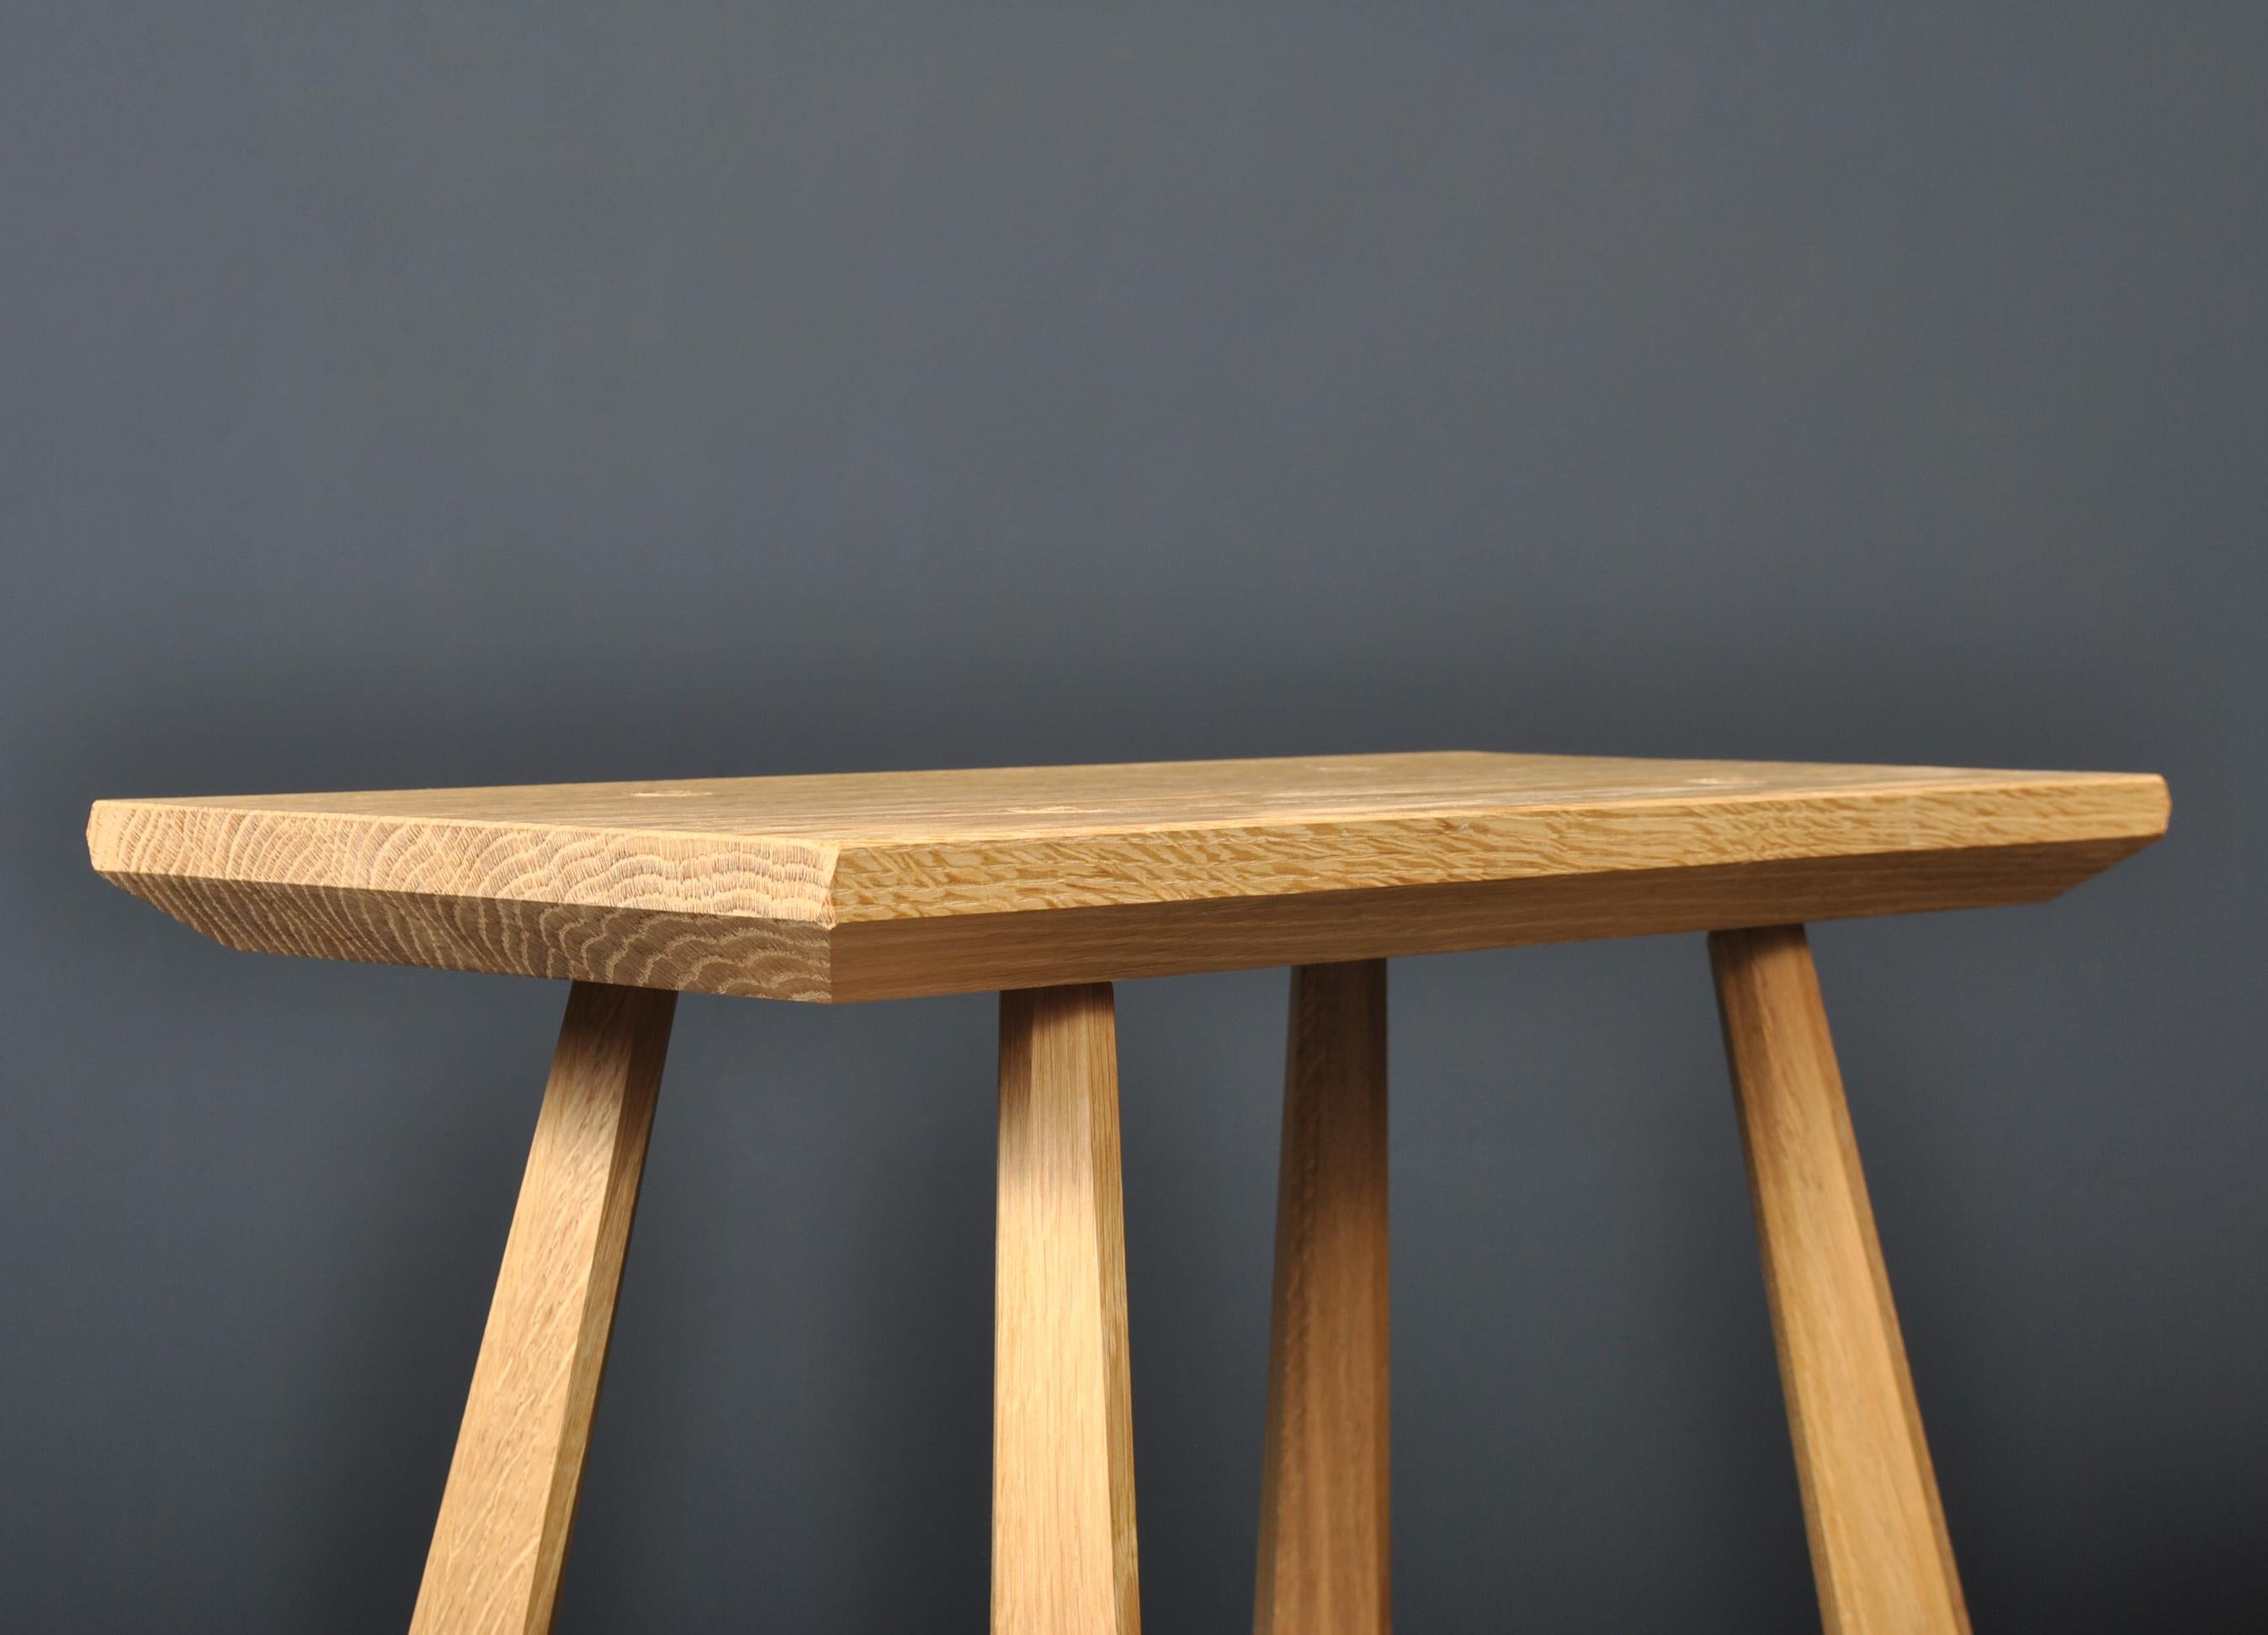 Hand-Crafted Handcrafted Oak Single Seat Bench